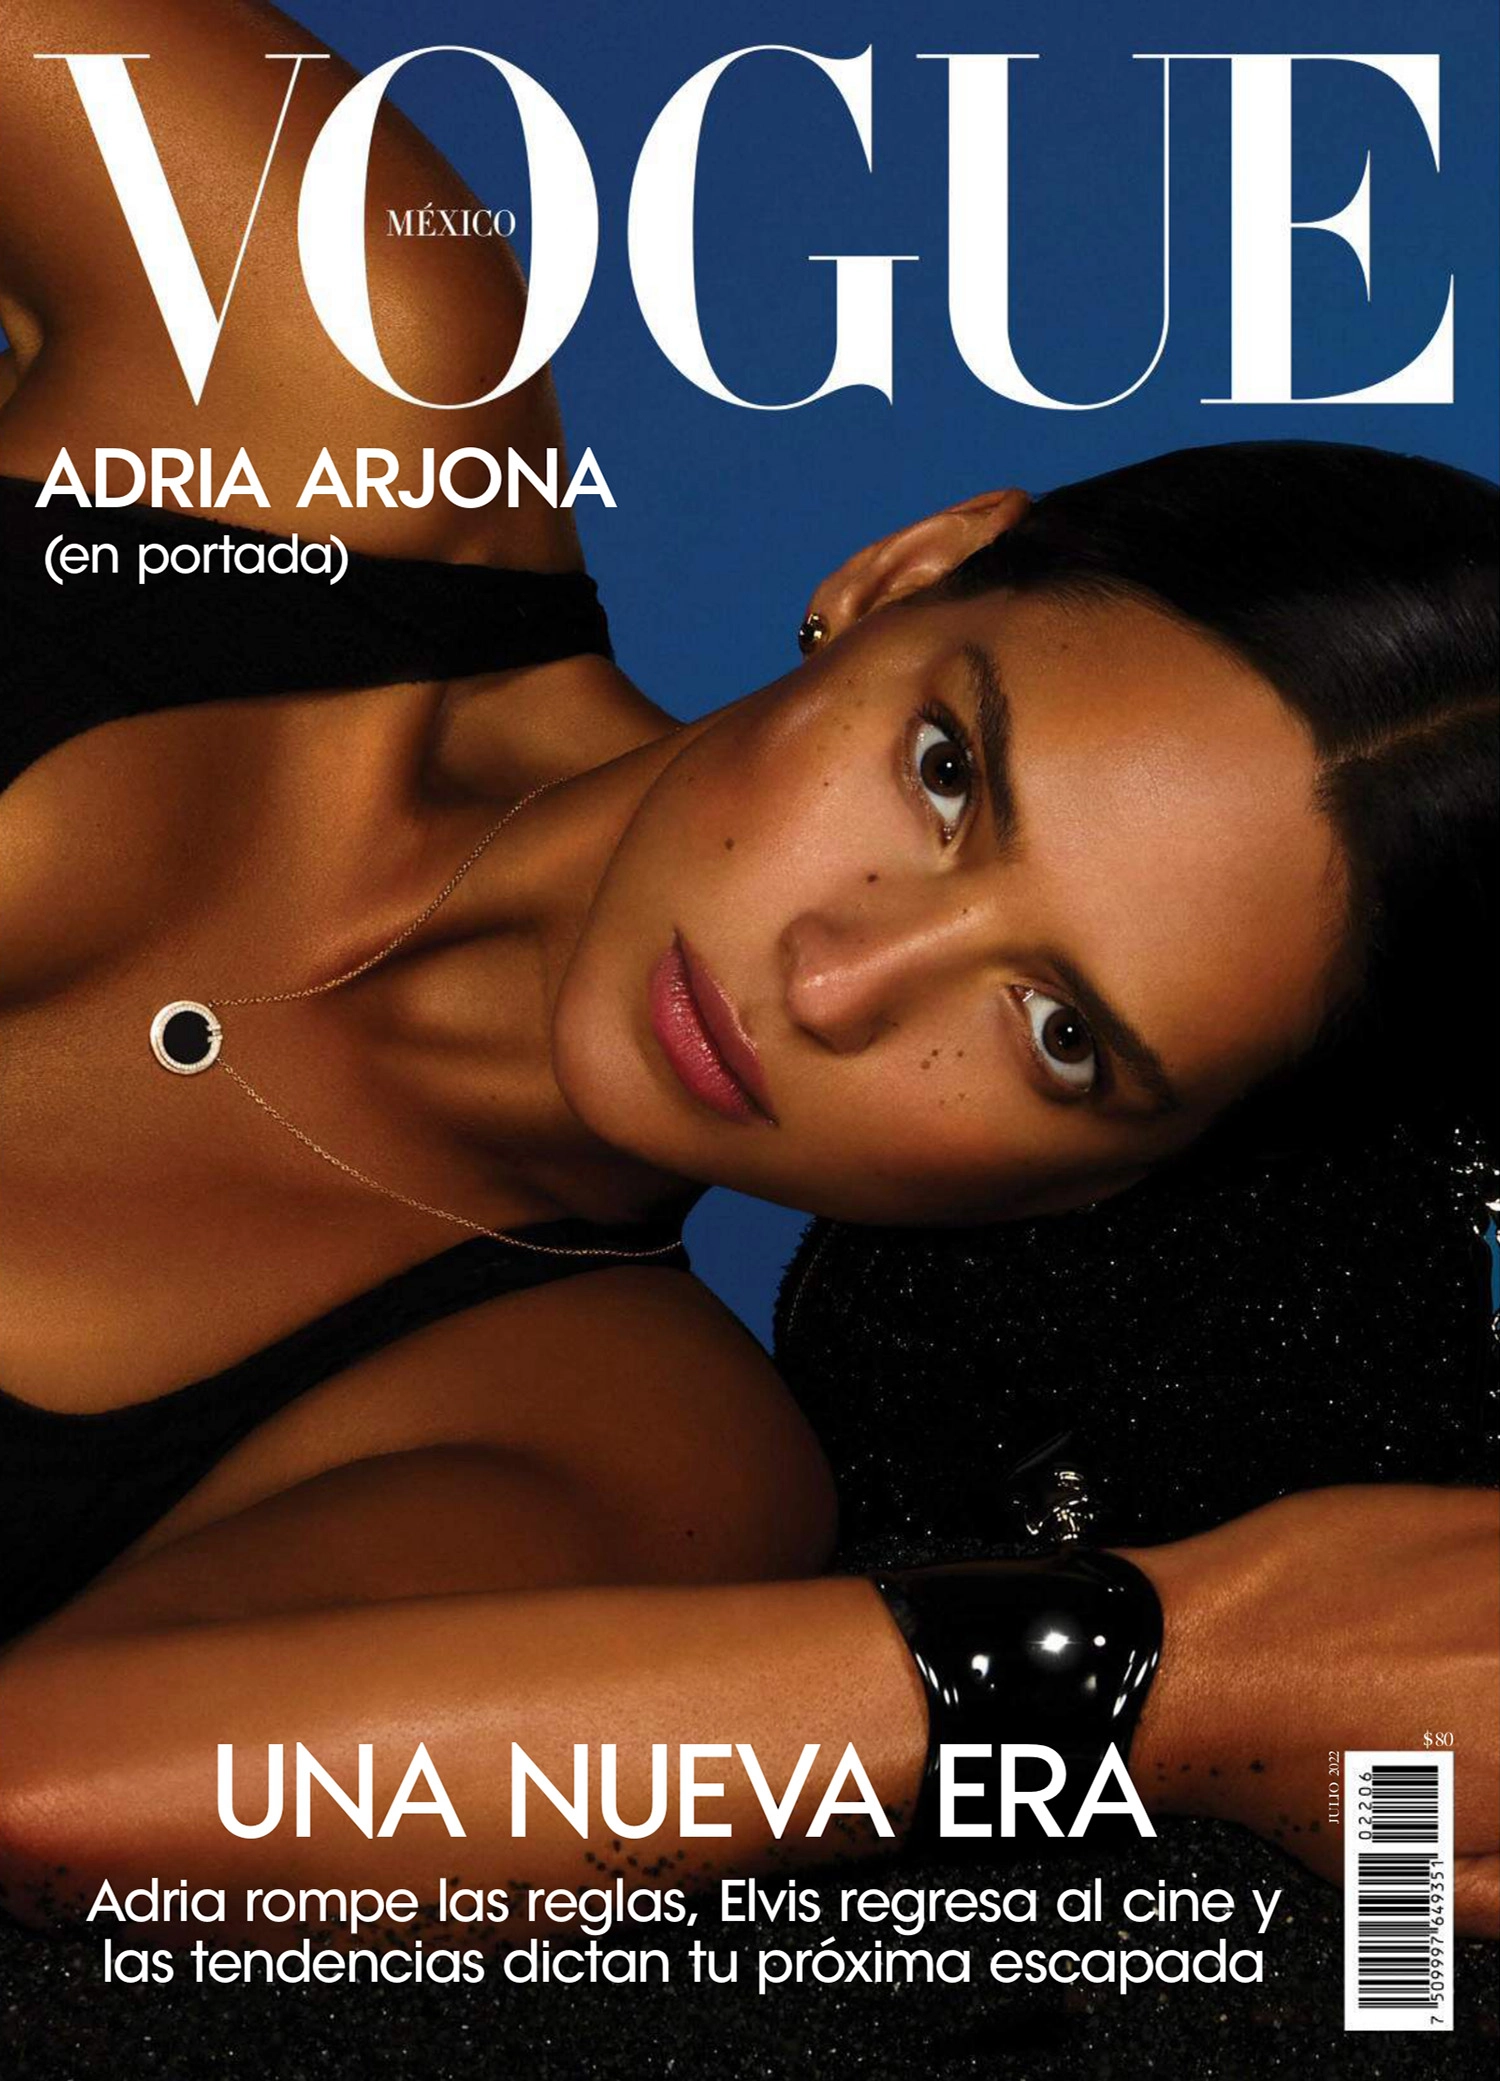 Adria Arjona covers Vogue Mexico & Latin America July 2022 by Brye Anderson